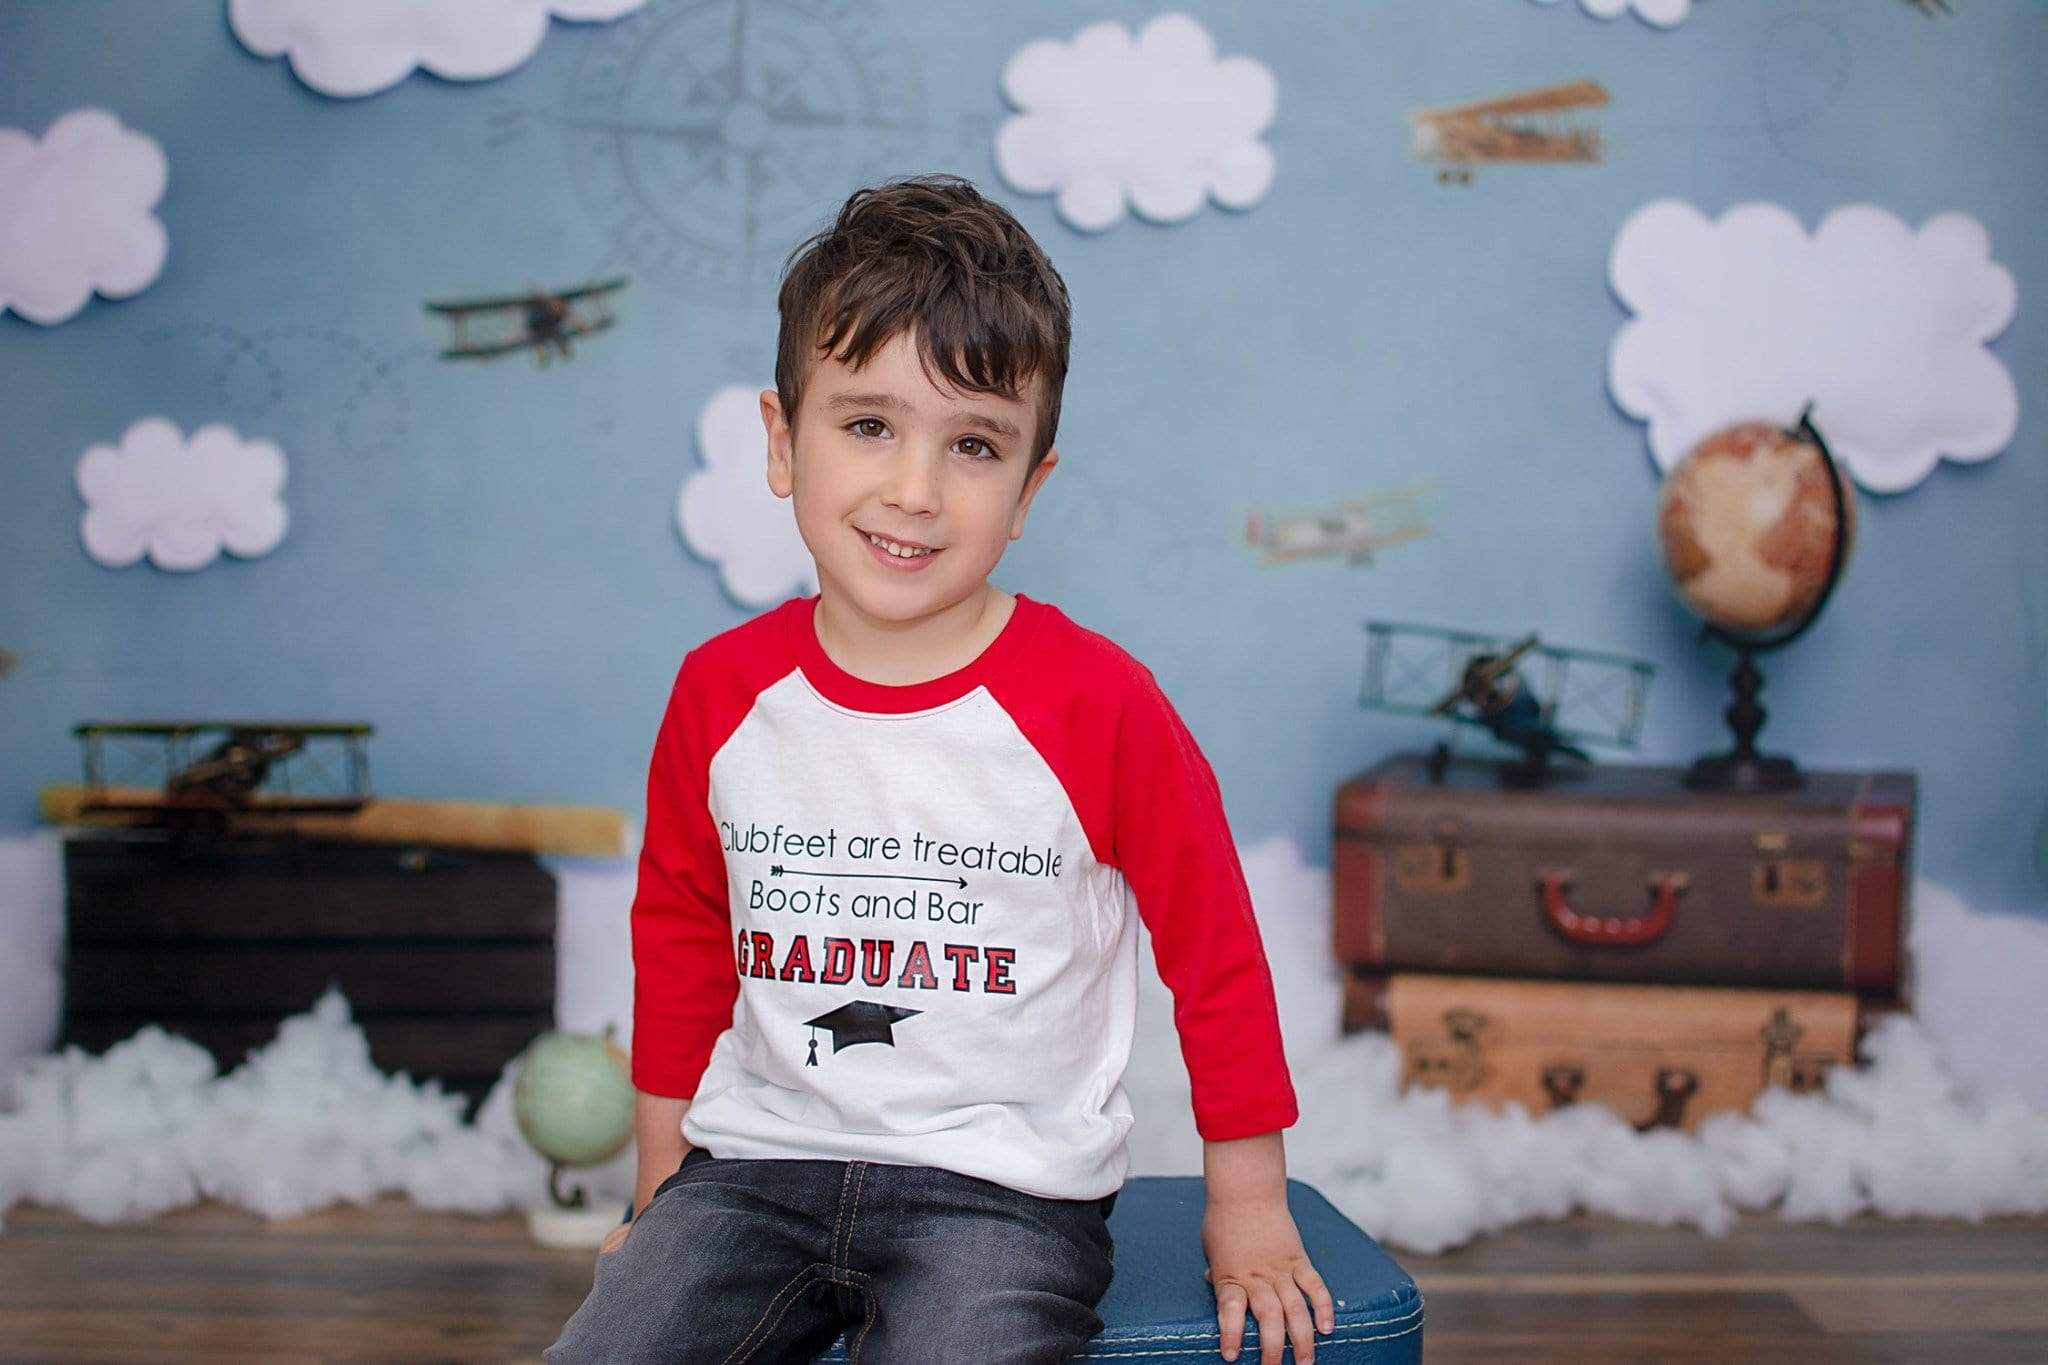 Kate Come Fly with Me Cloud Back to School Children Backdrop for Photography Designed by Erin Larkins